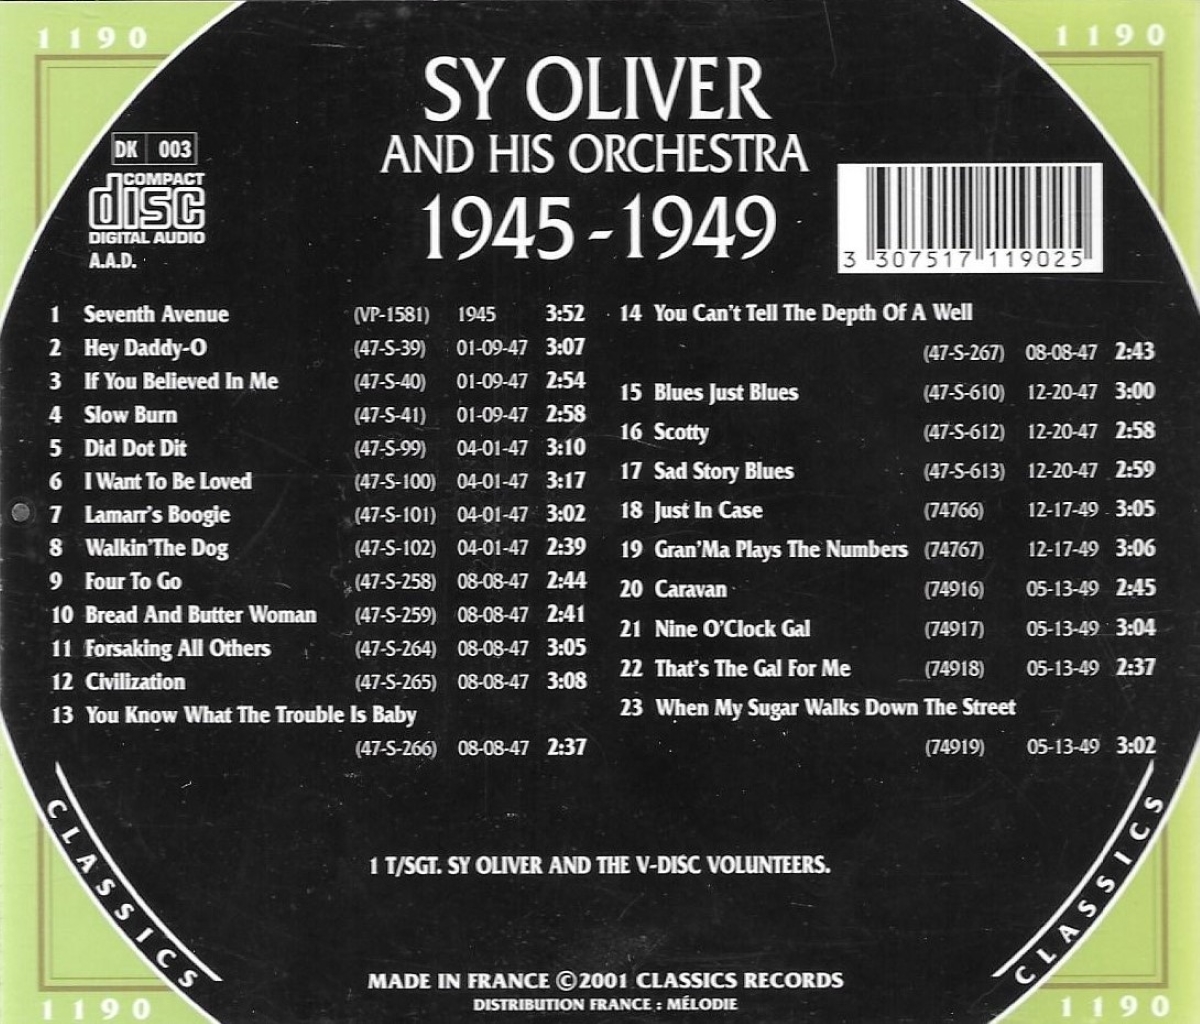 The Chronological Sy Oliver and His Orchestra-1945-1949